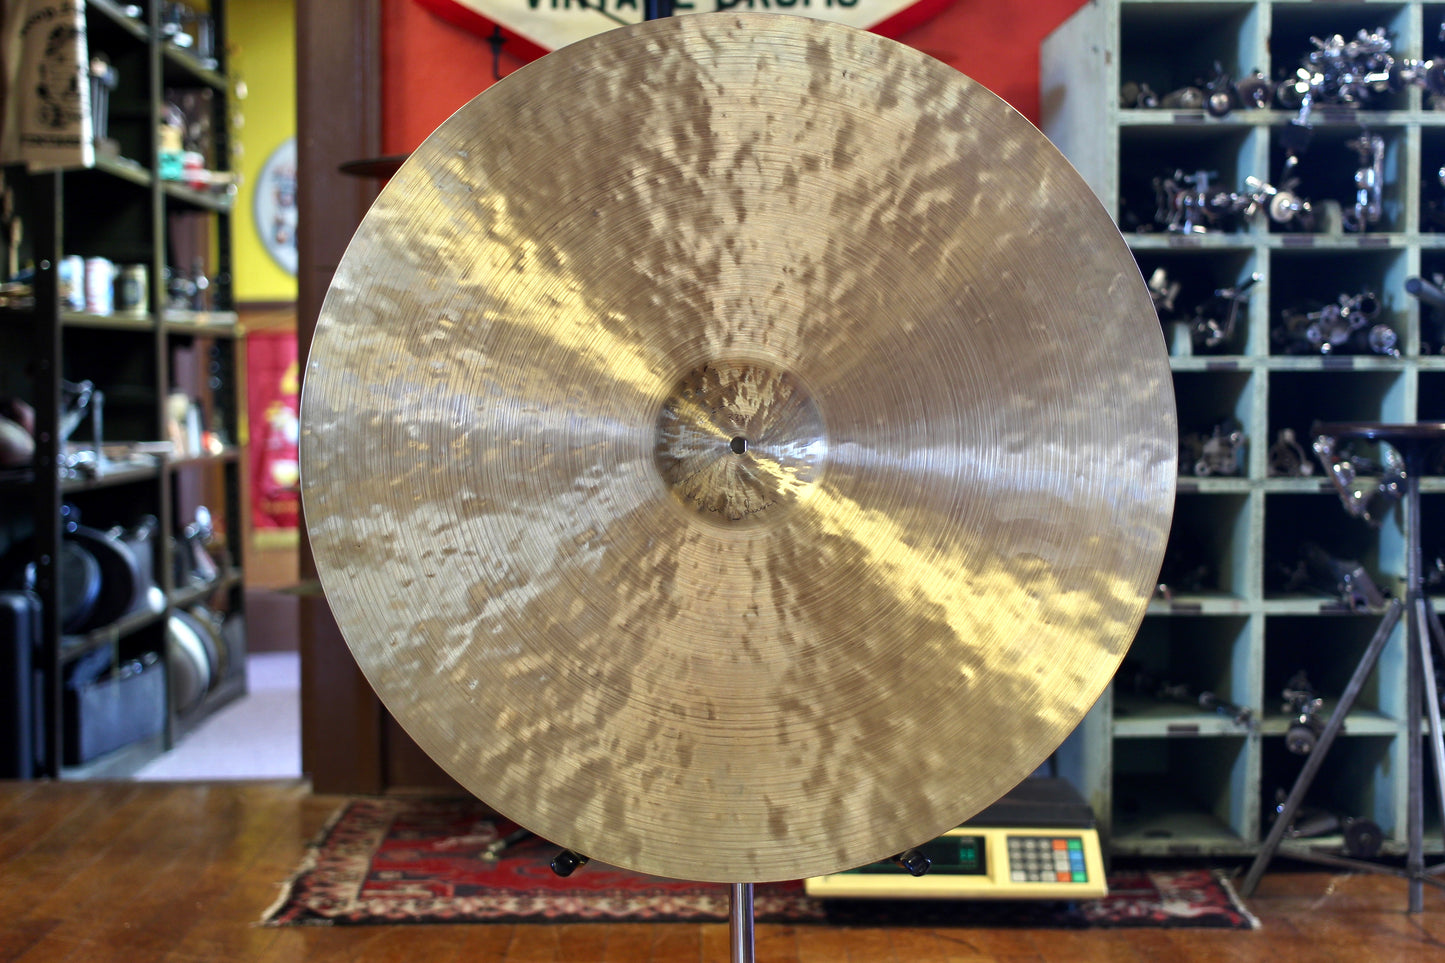 Used Istanbul Agop 30th Anniversary 26" Ride Cymbal 3379g